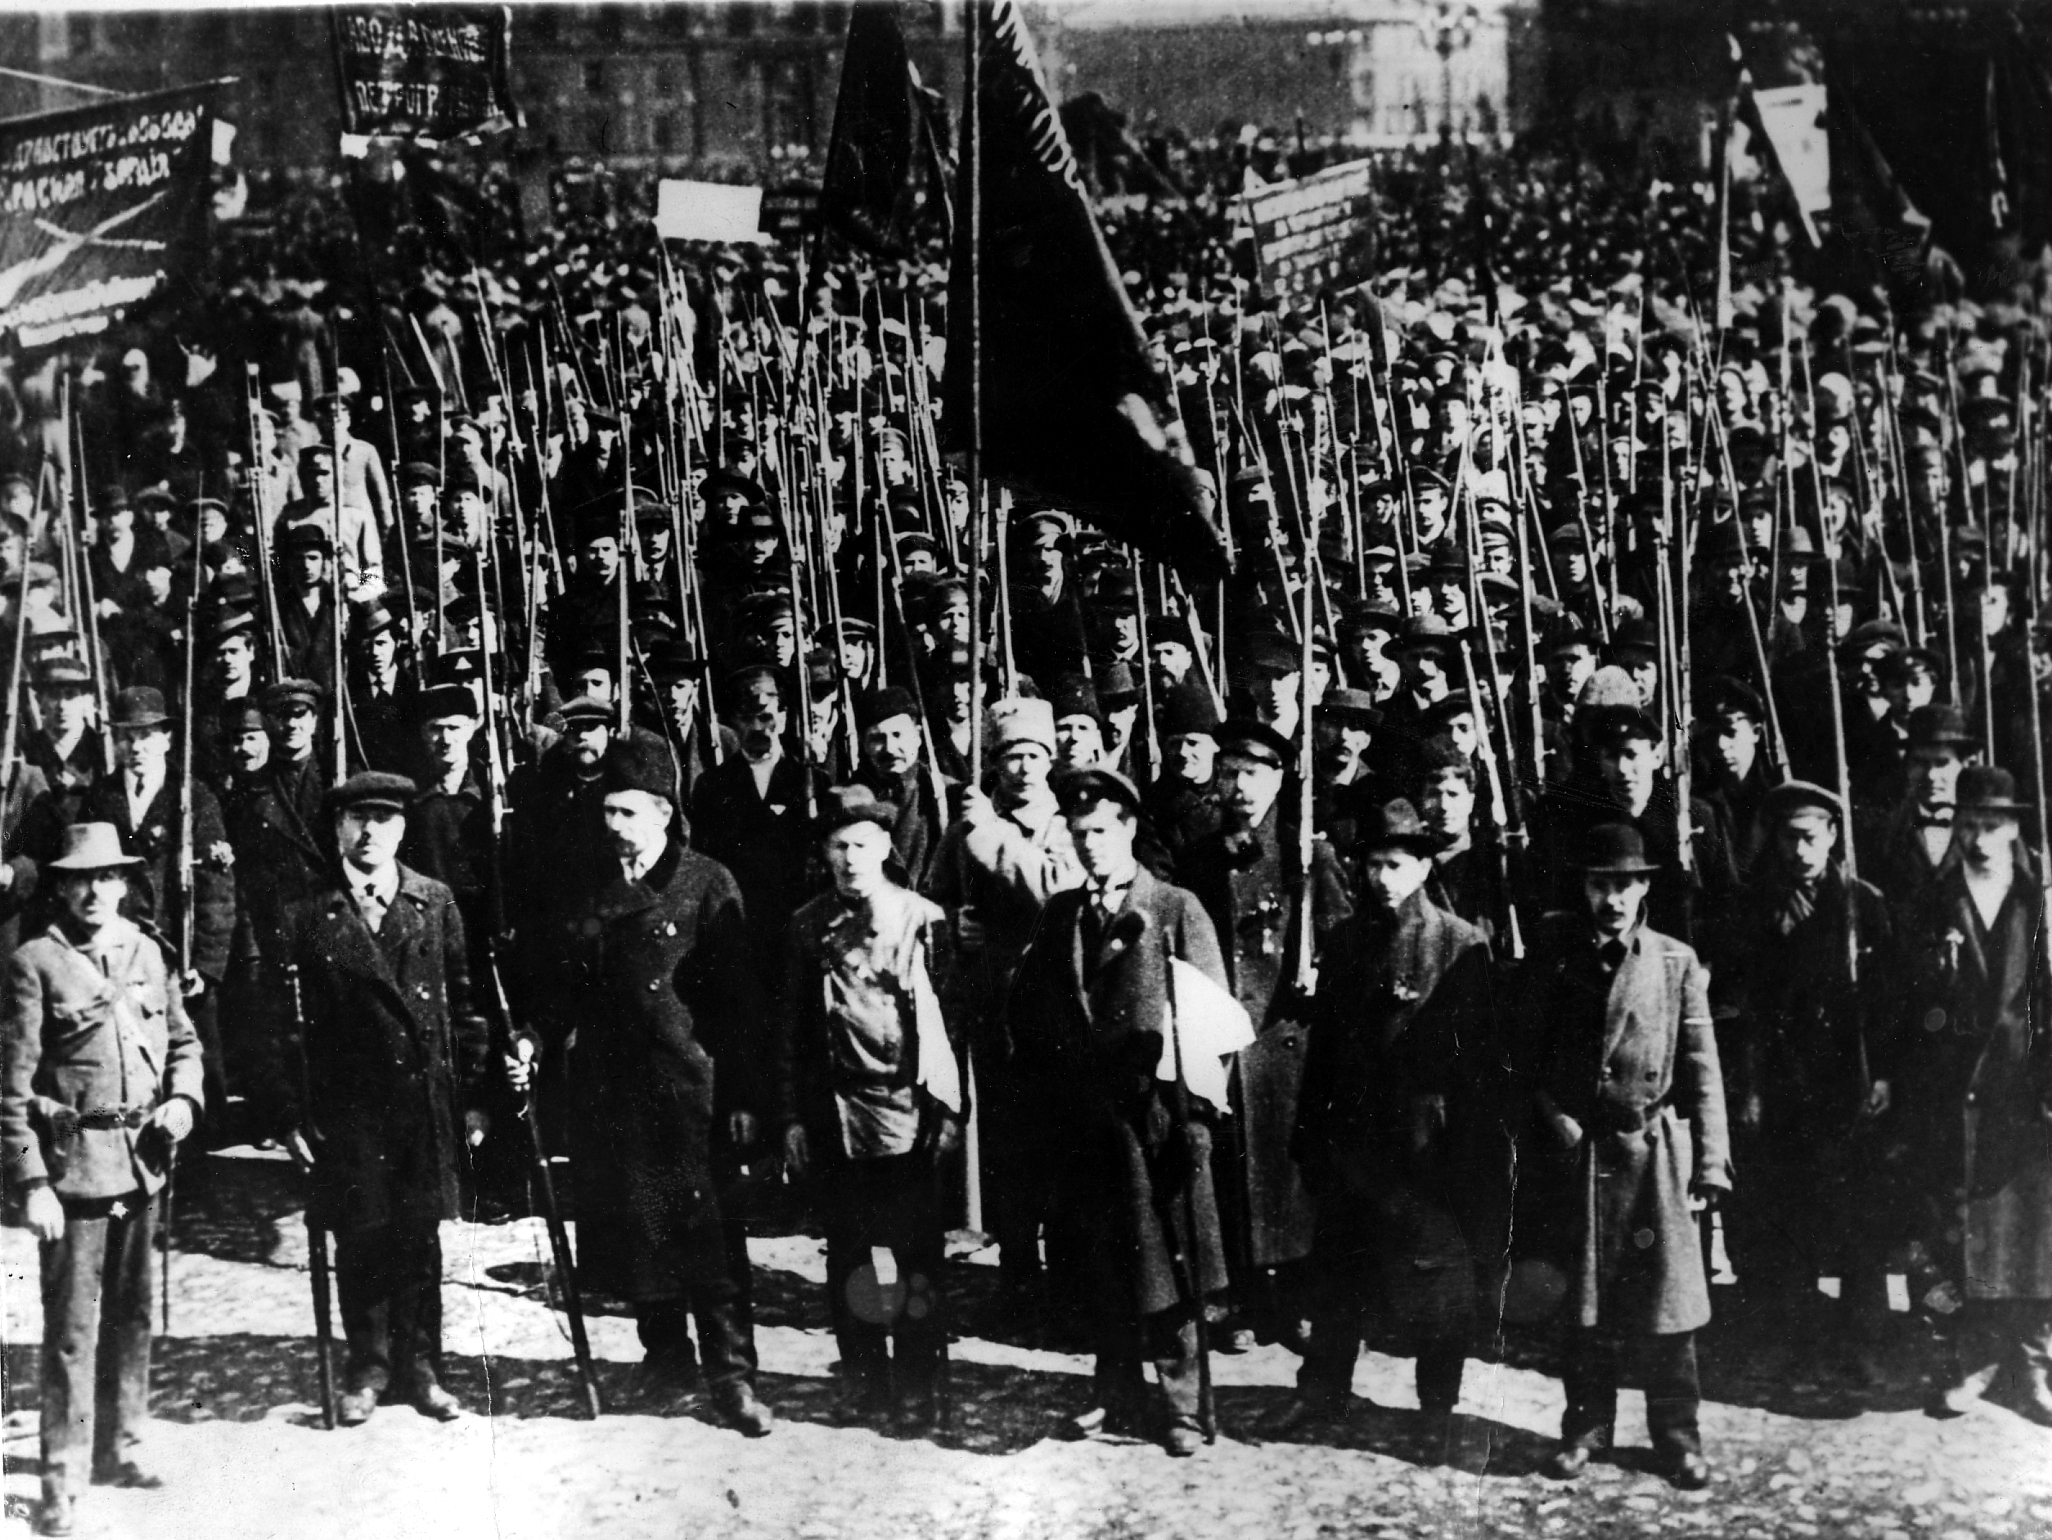 May Day 1917. This picture released by the Soviet Authorities shows The Red Guard of Petrograd in preparation for the great October revolution.